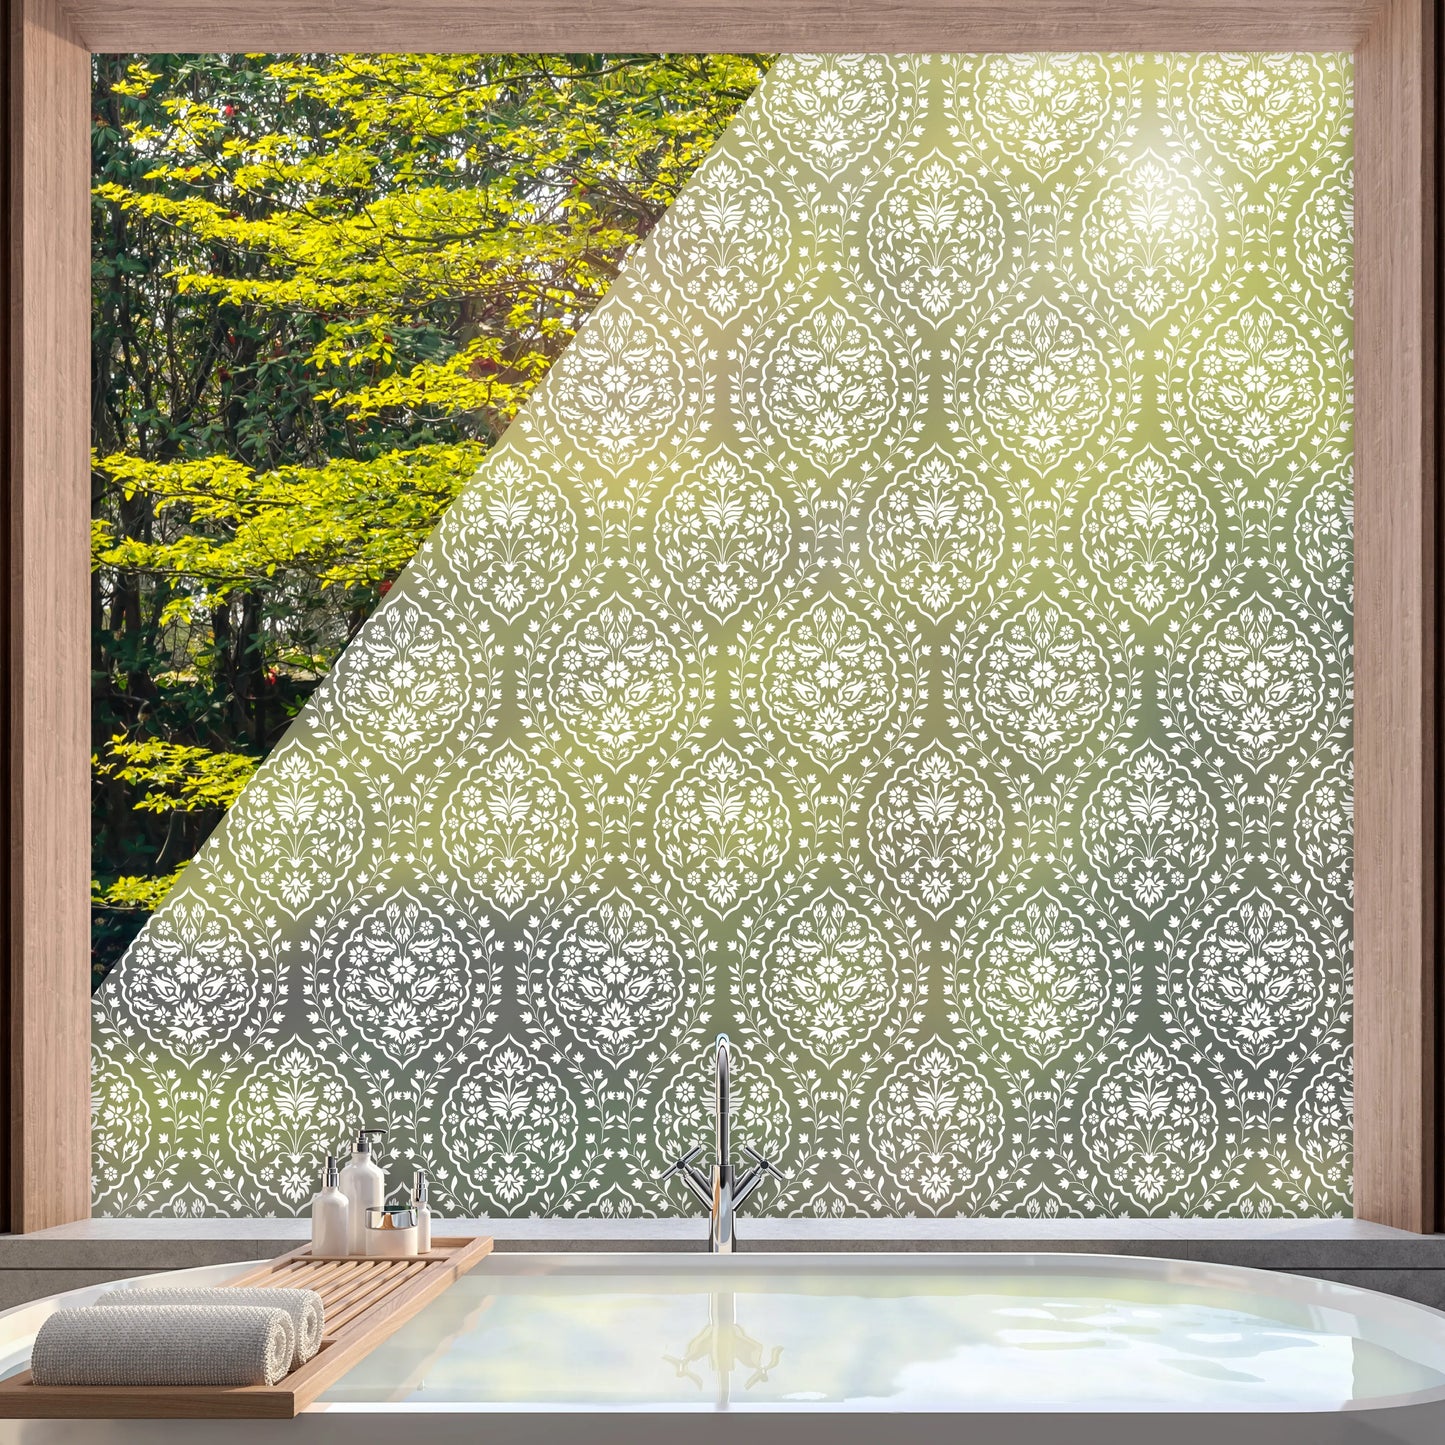 Privacy Window Isfahan Frosted Window Privacy Panel Dizzy Duck Designs